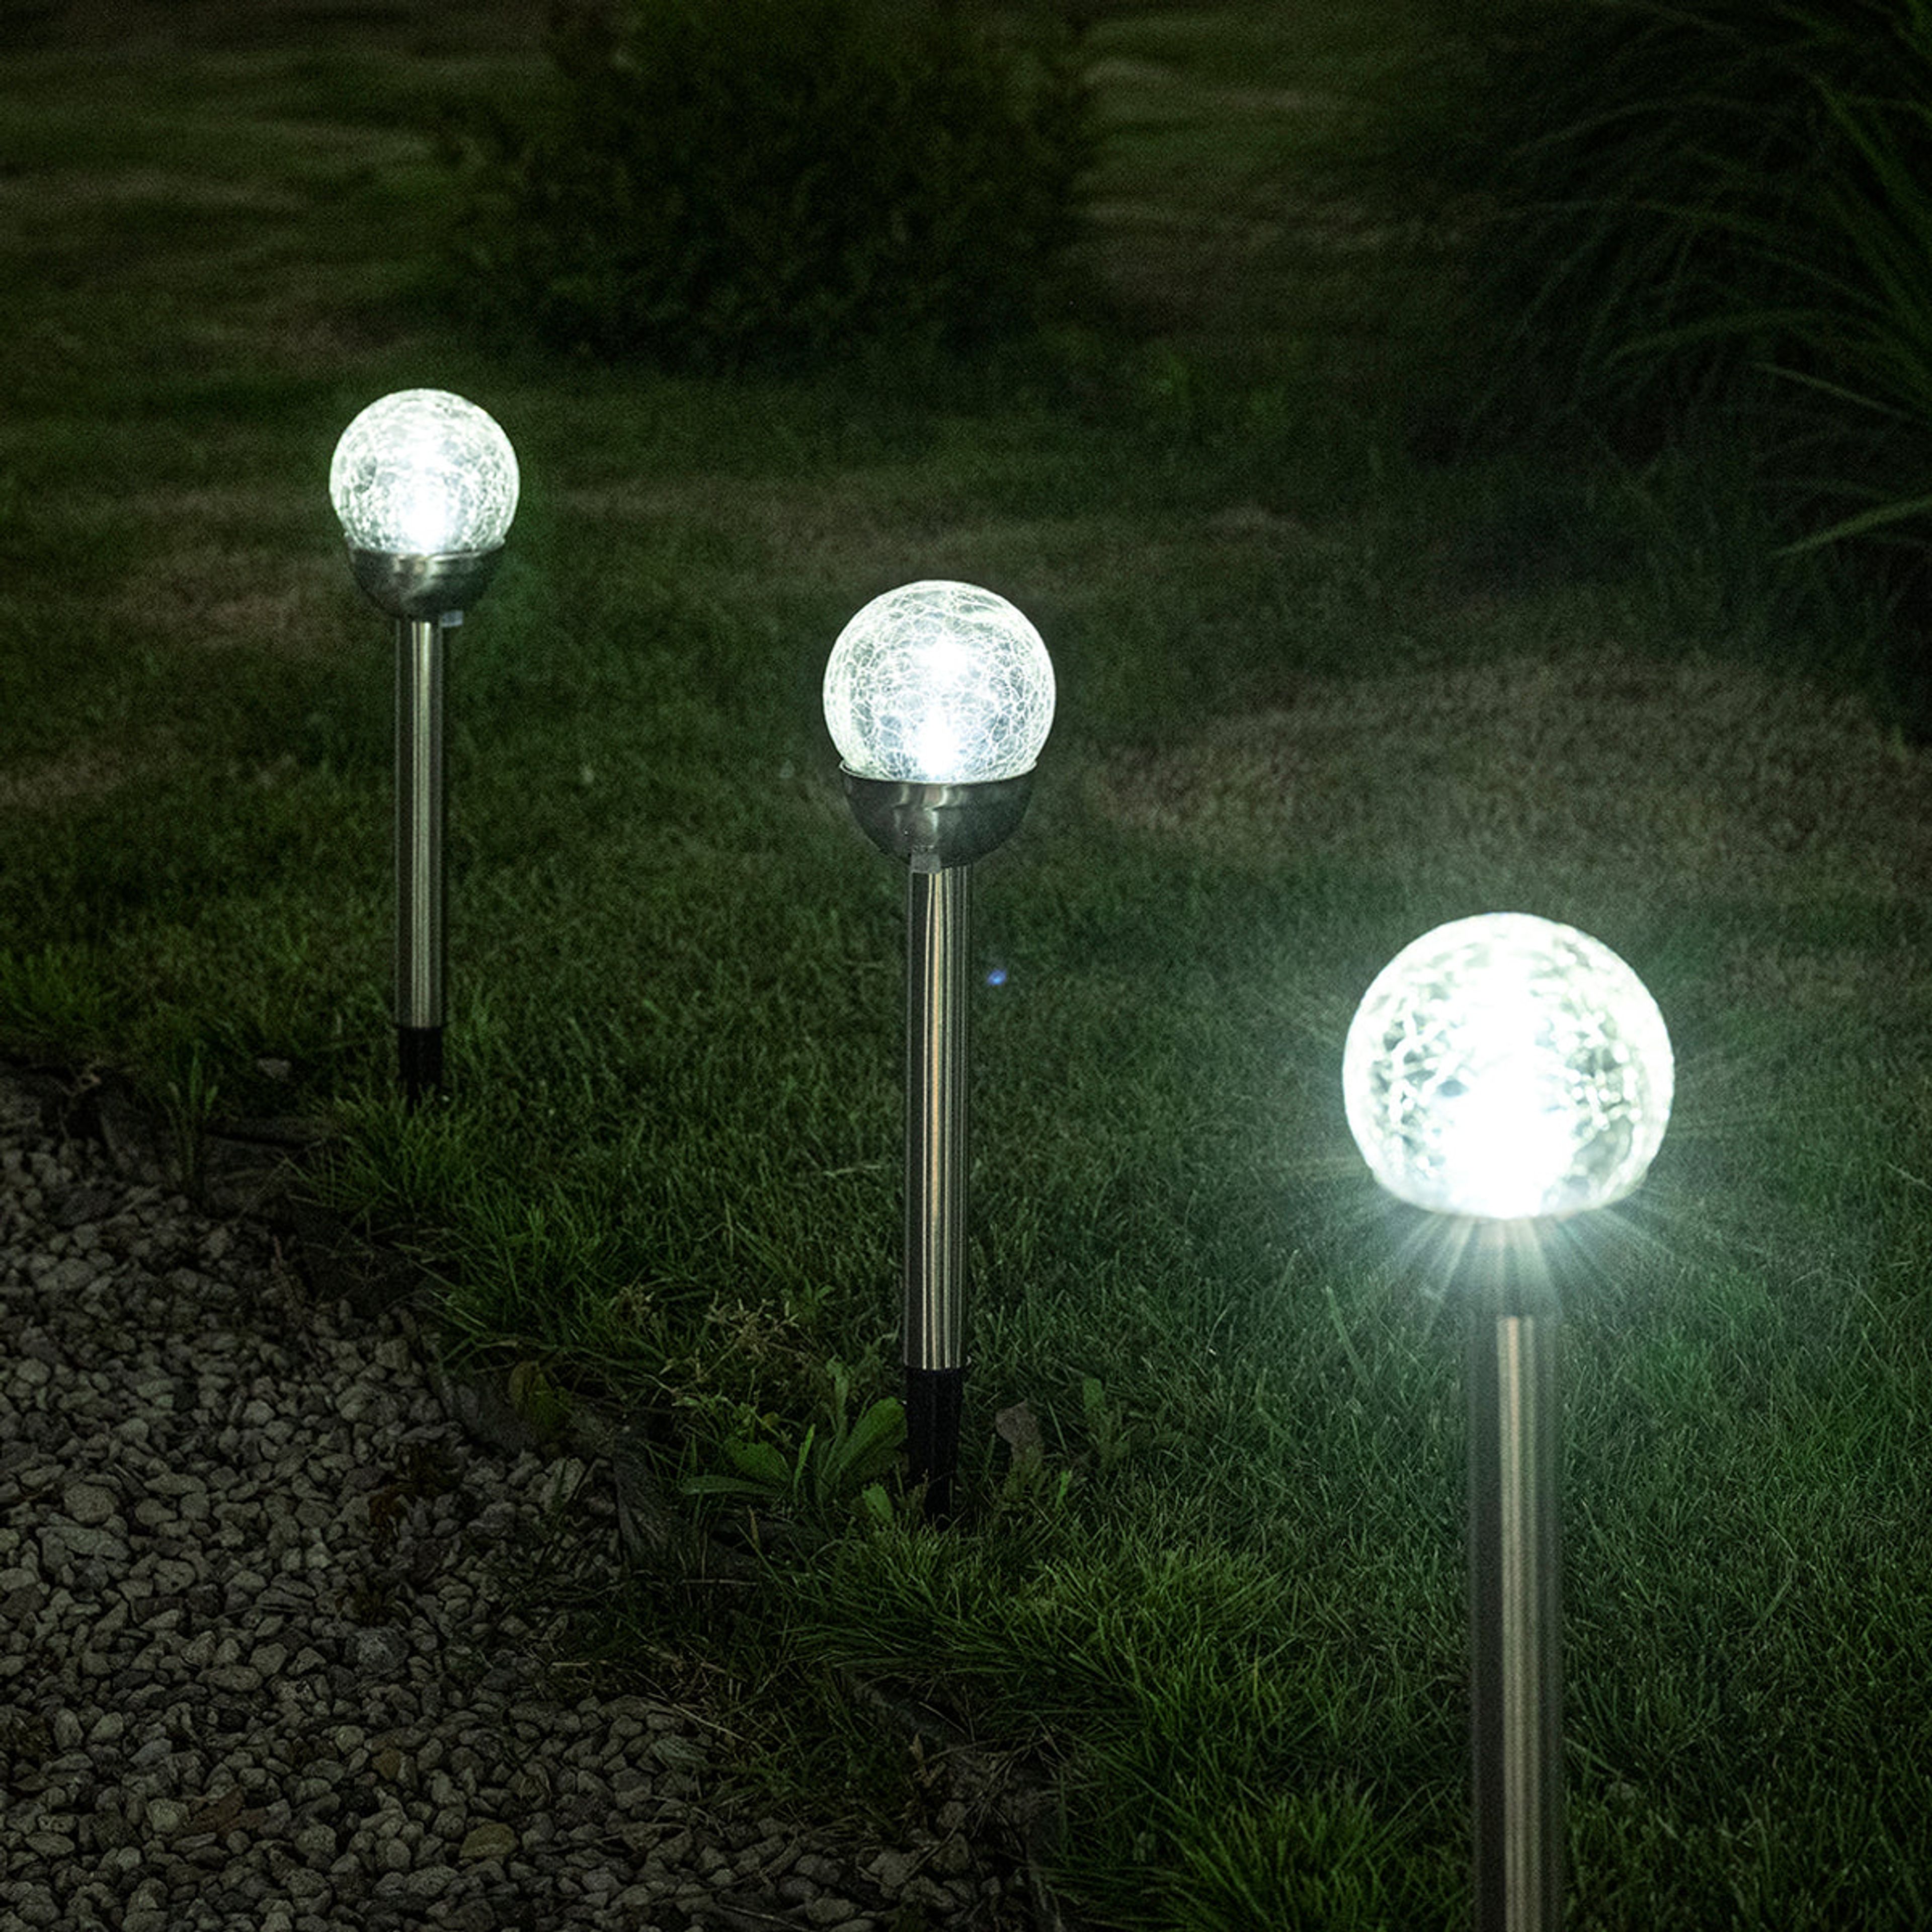 Gigalumi Colorful Solar Crackle Glass Ball Lights Set (3&6 Pack)